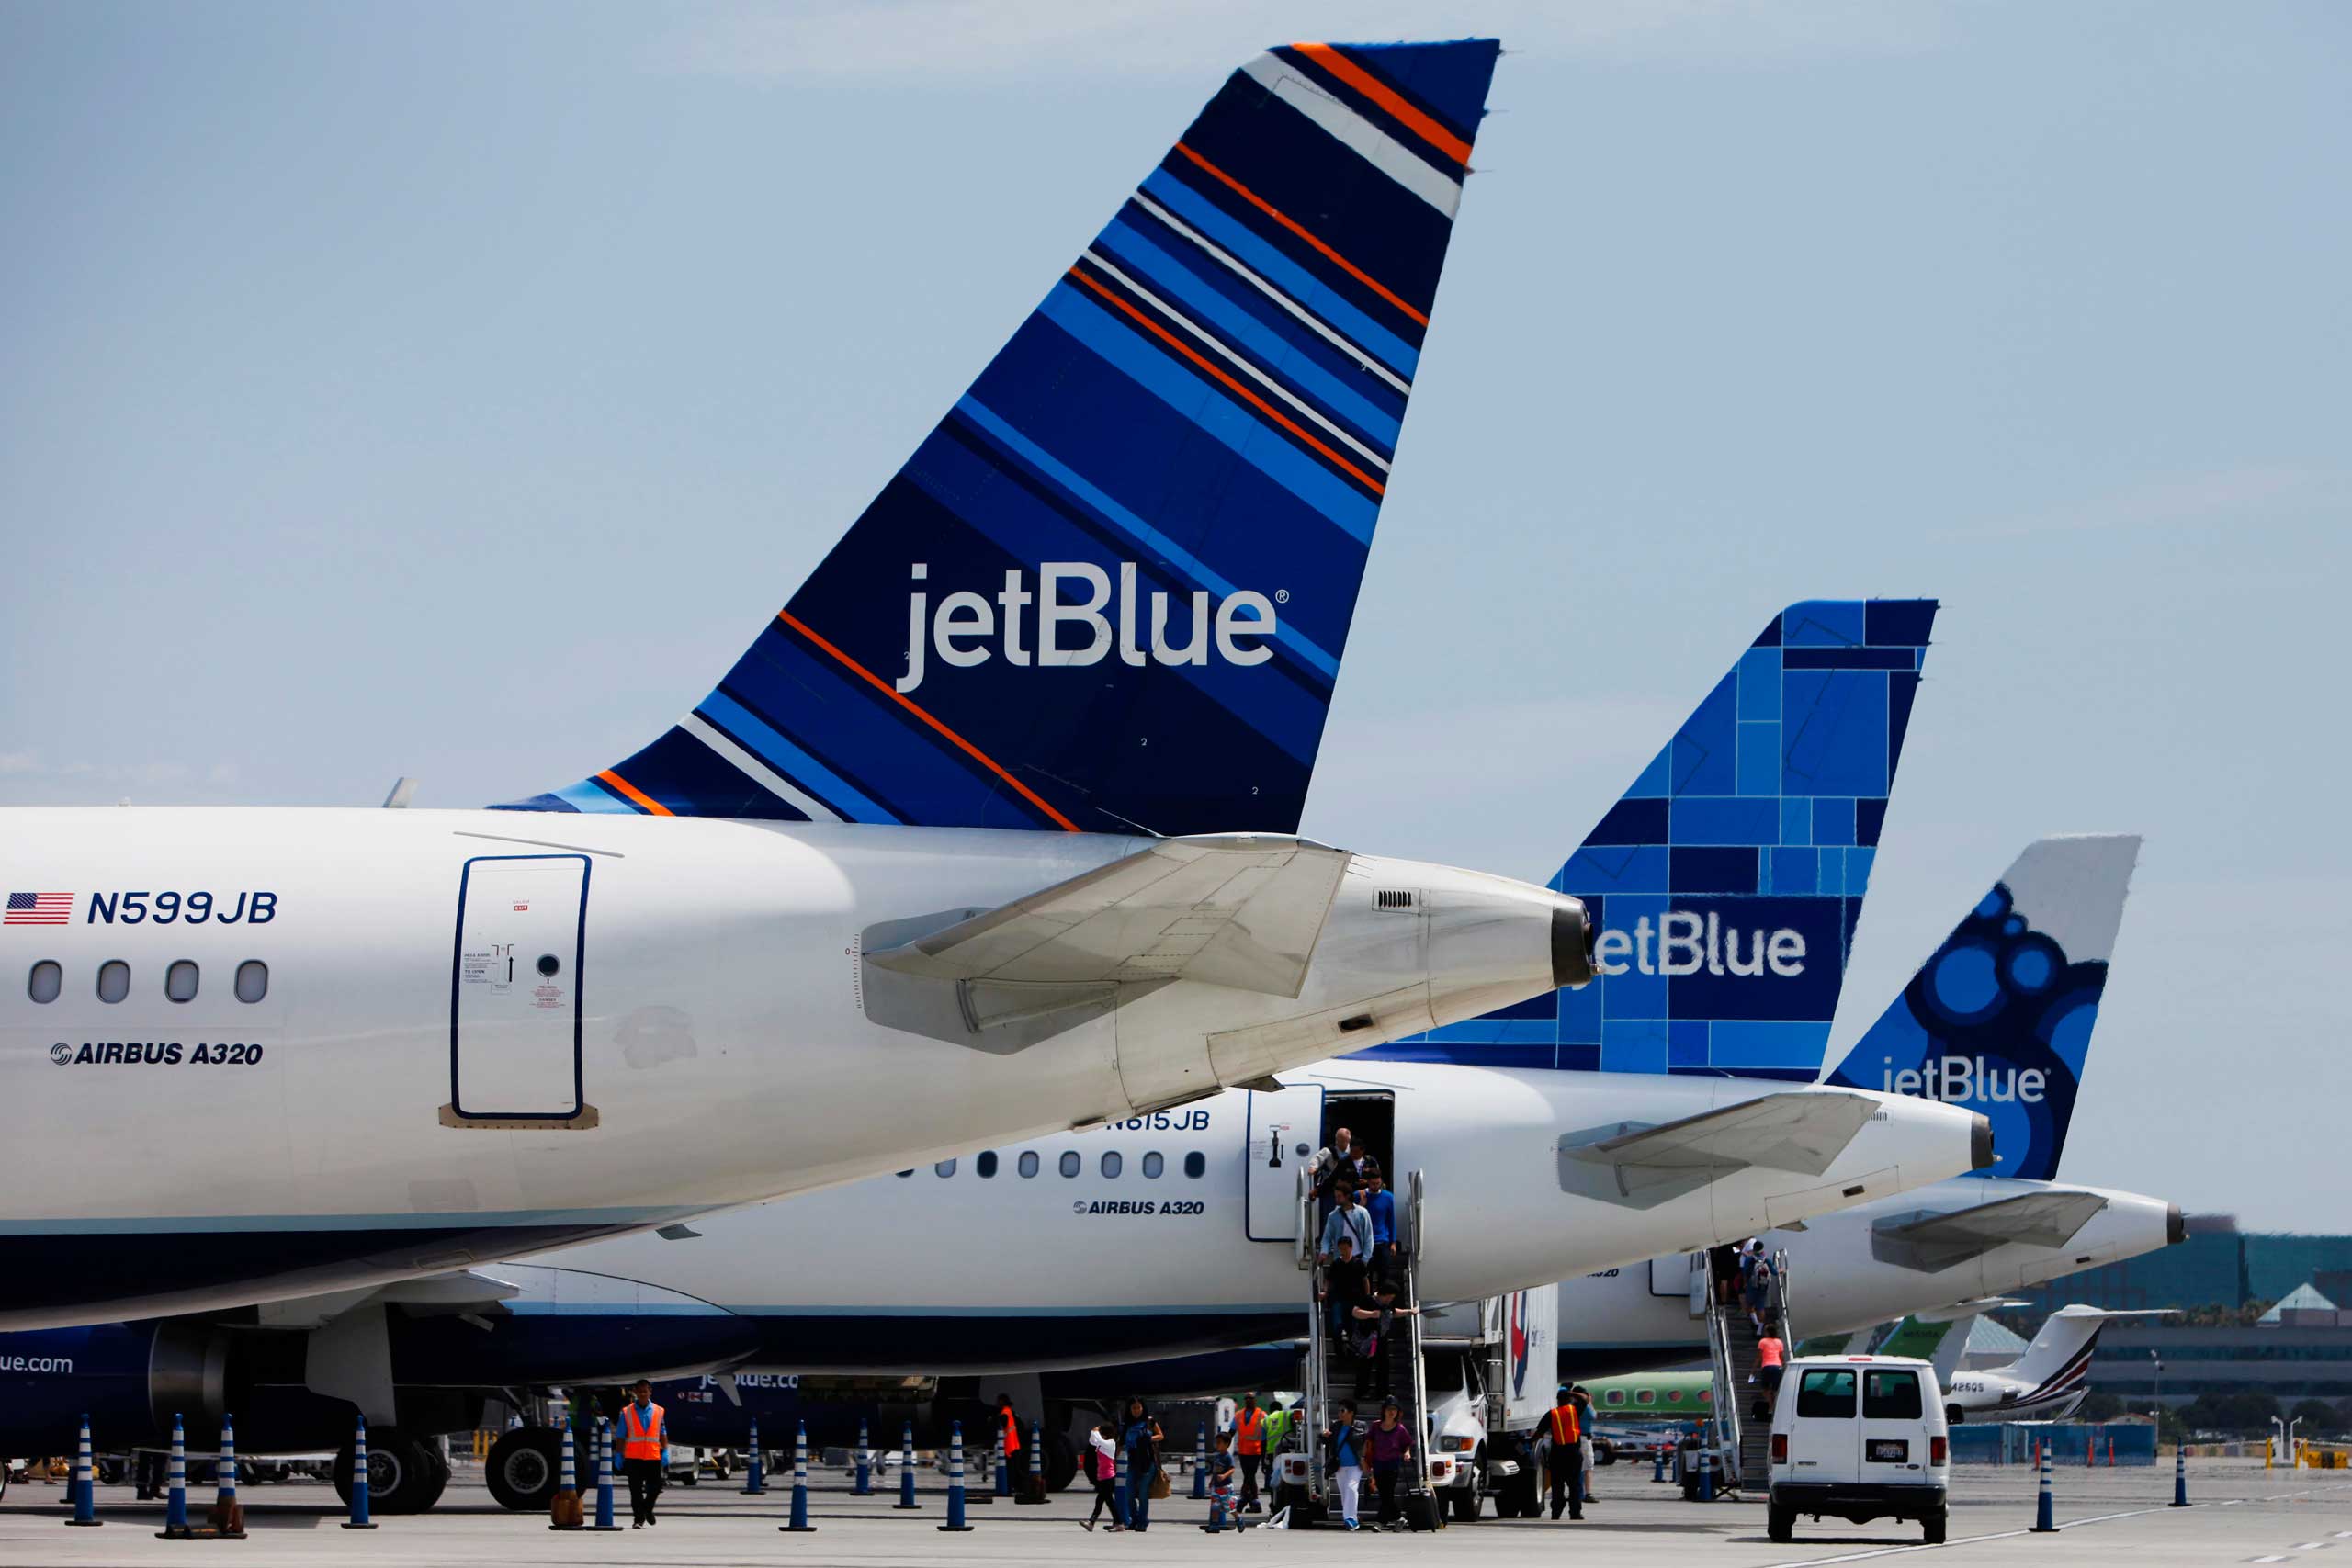 Passengers exit a JetBlue Airways Corp. plane at Long Beach Airport (LGB) in Long Beach, California, U.S., on Monday, July 22, 2013.